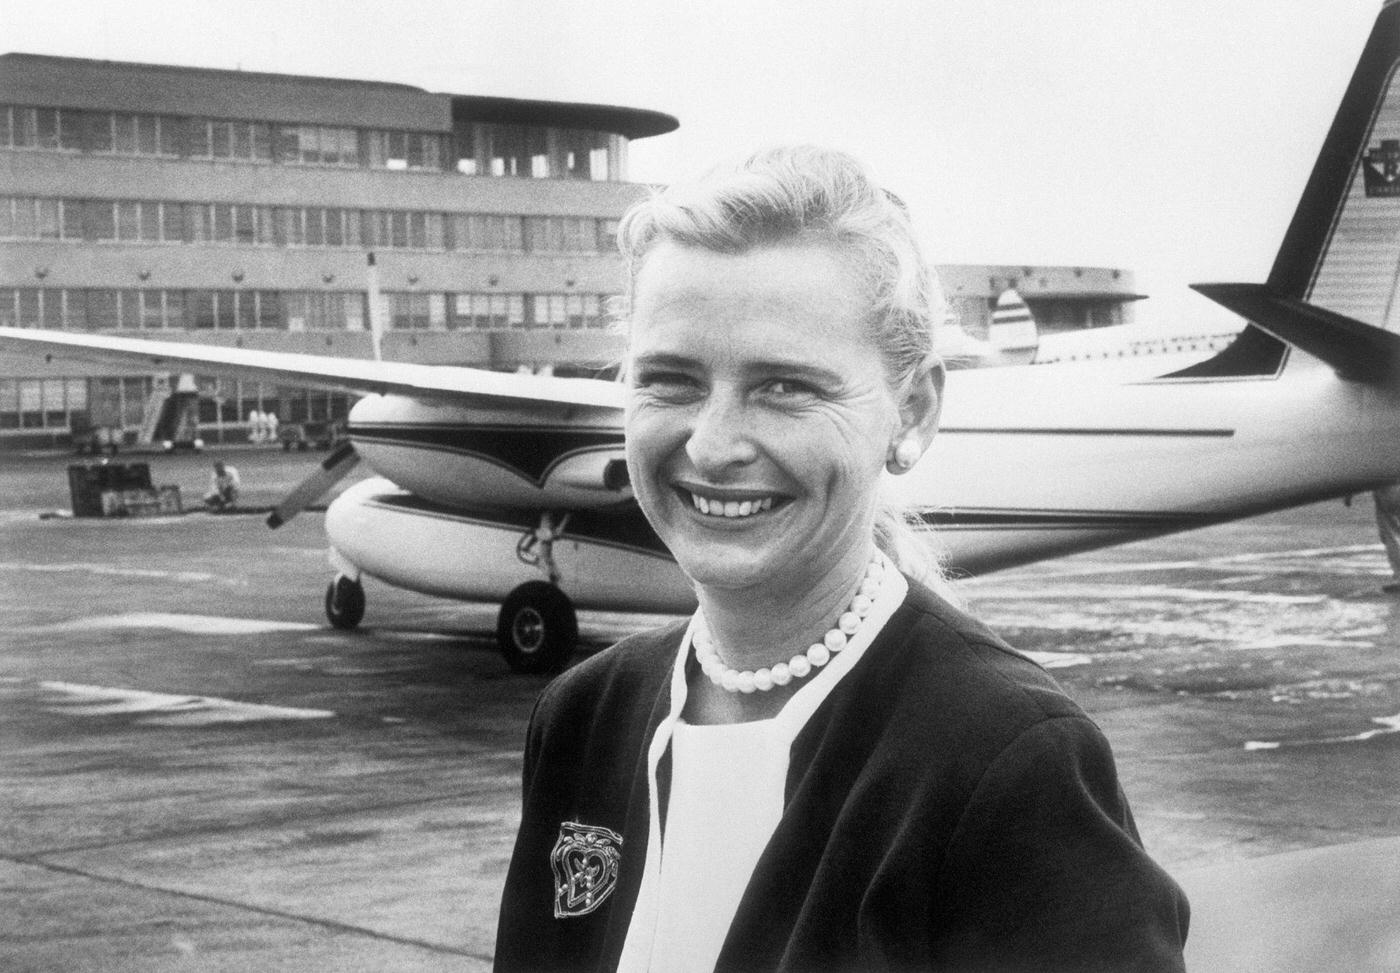 Pilot Jerrie Cobb Arriving at Greater Pittsburgh Airport, Circa 1950s